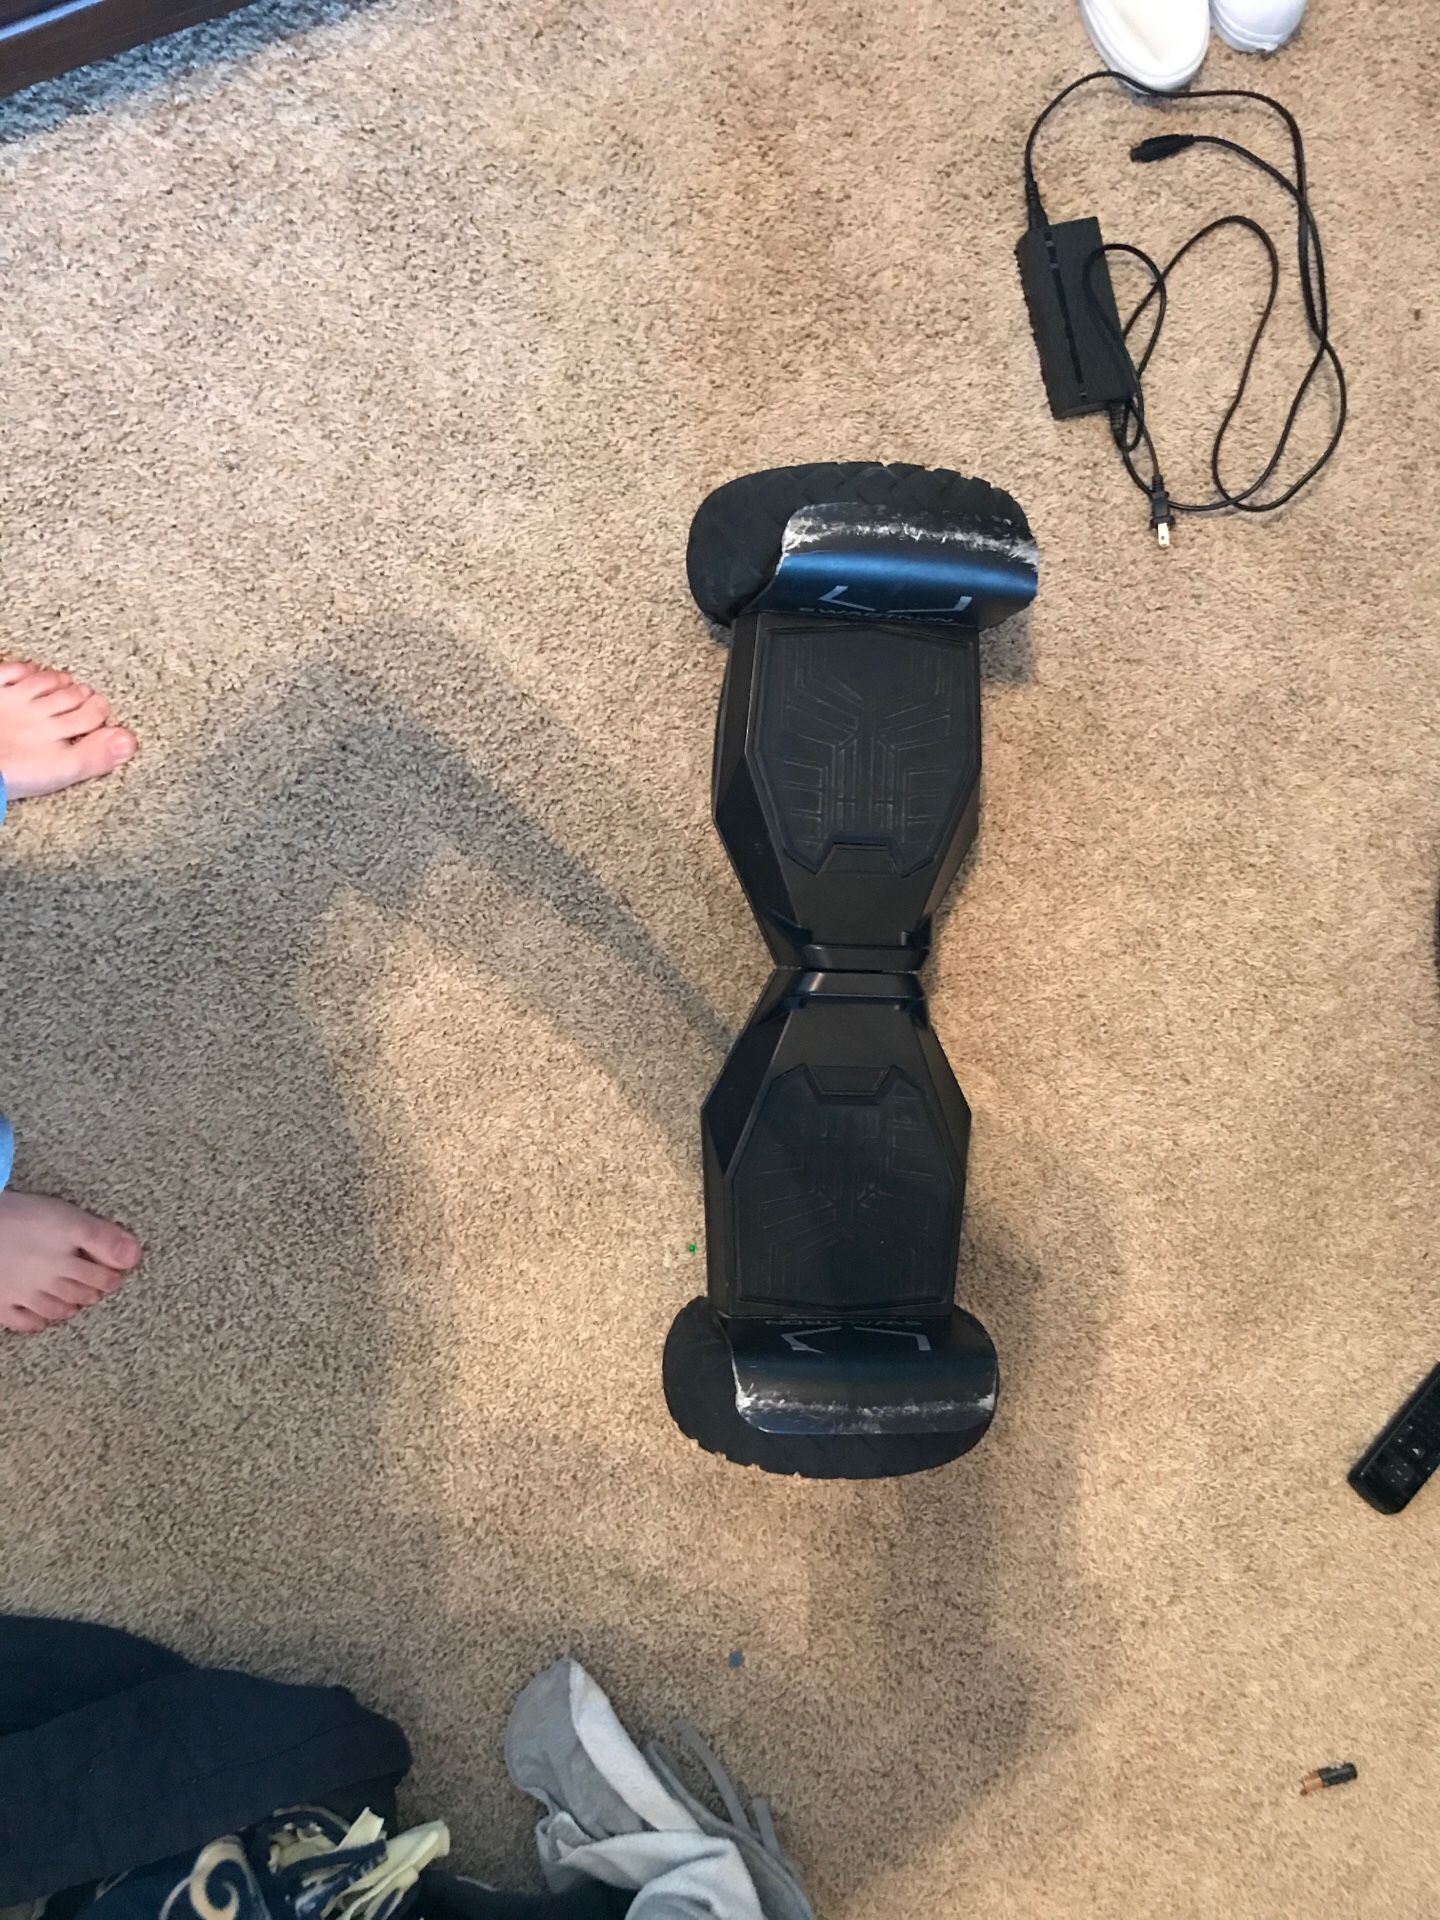 T6 SWAGTRON hoverboard